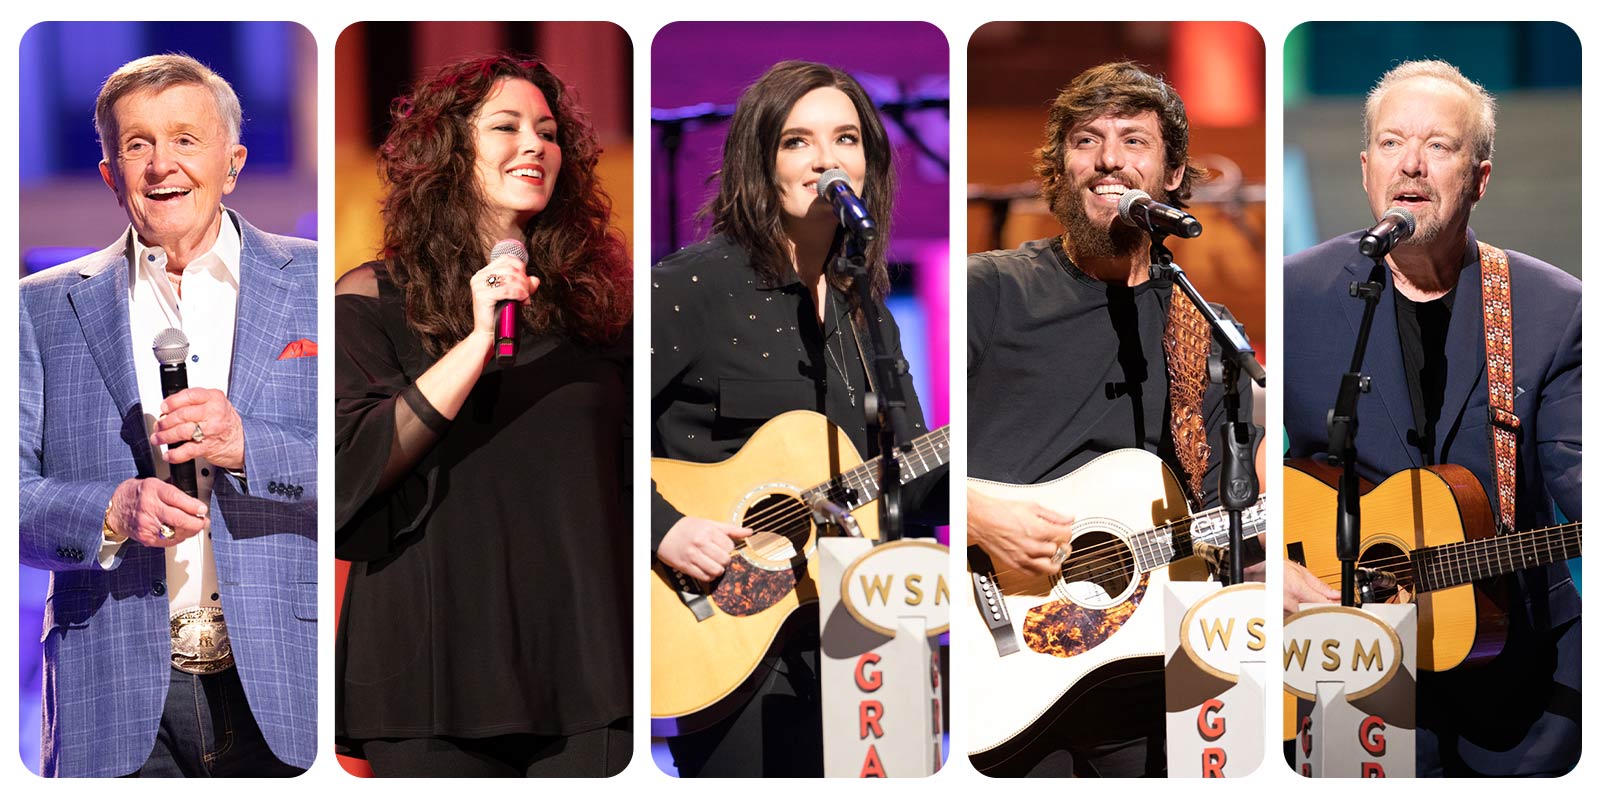 95 Years of Opry